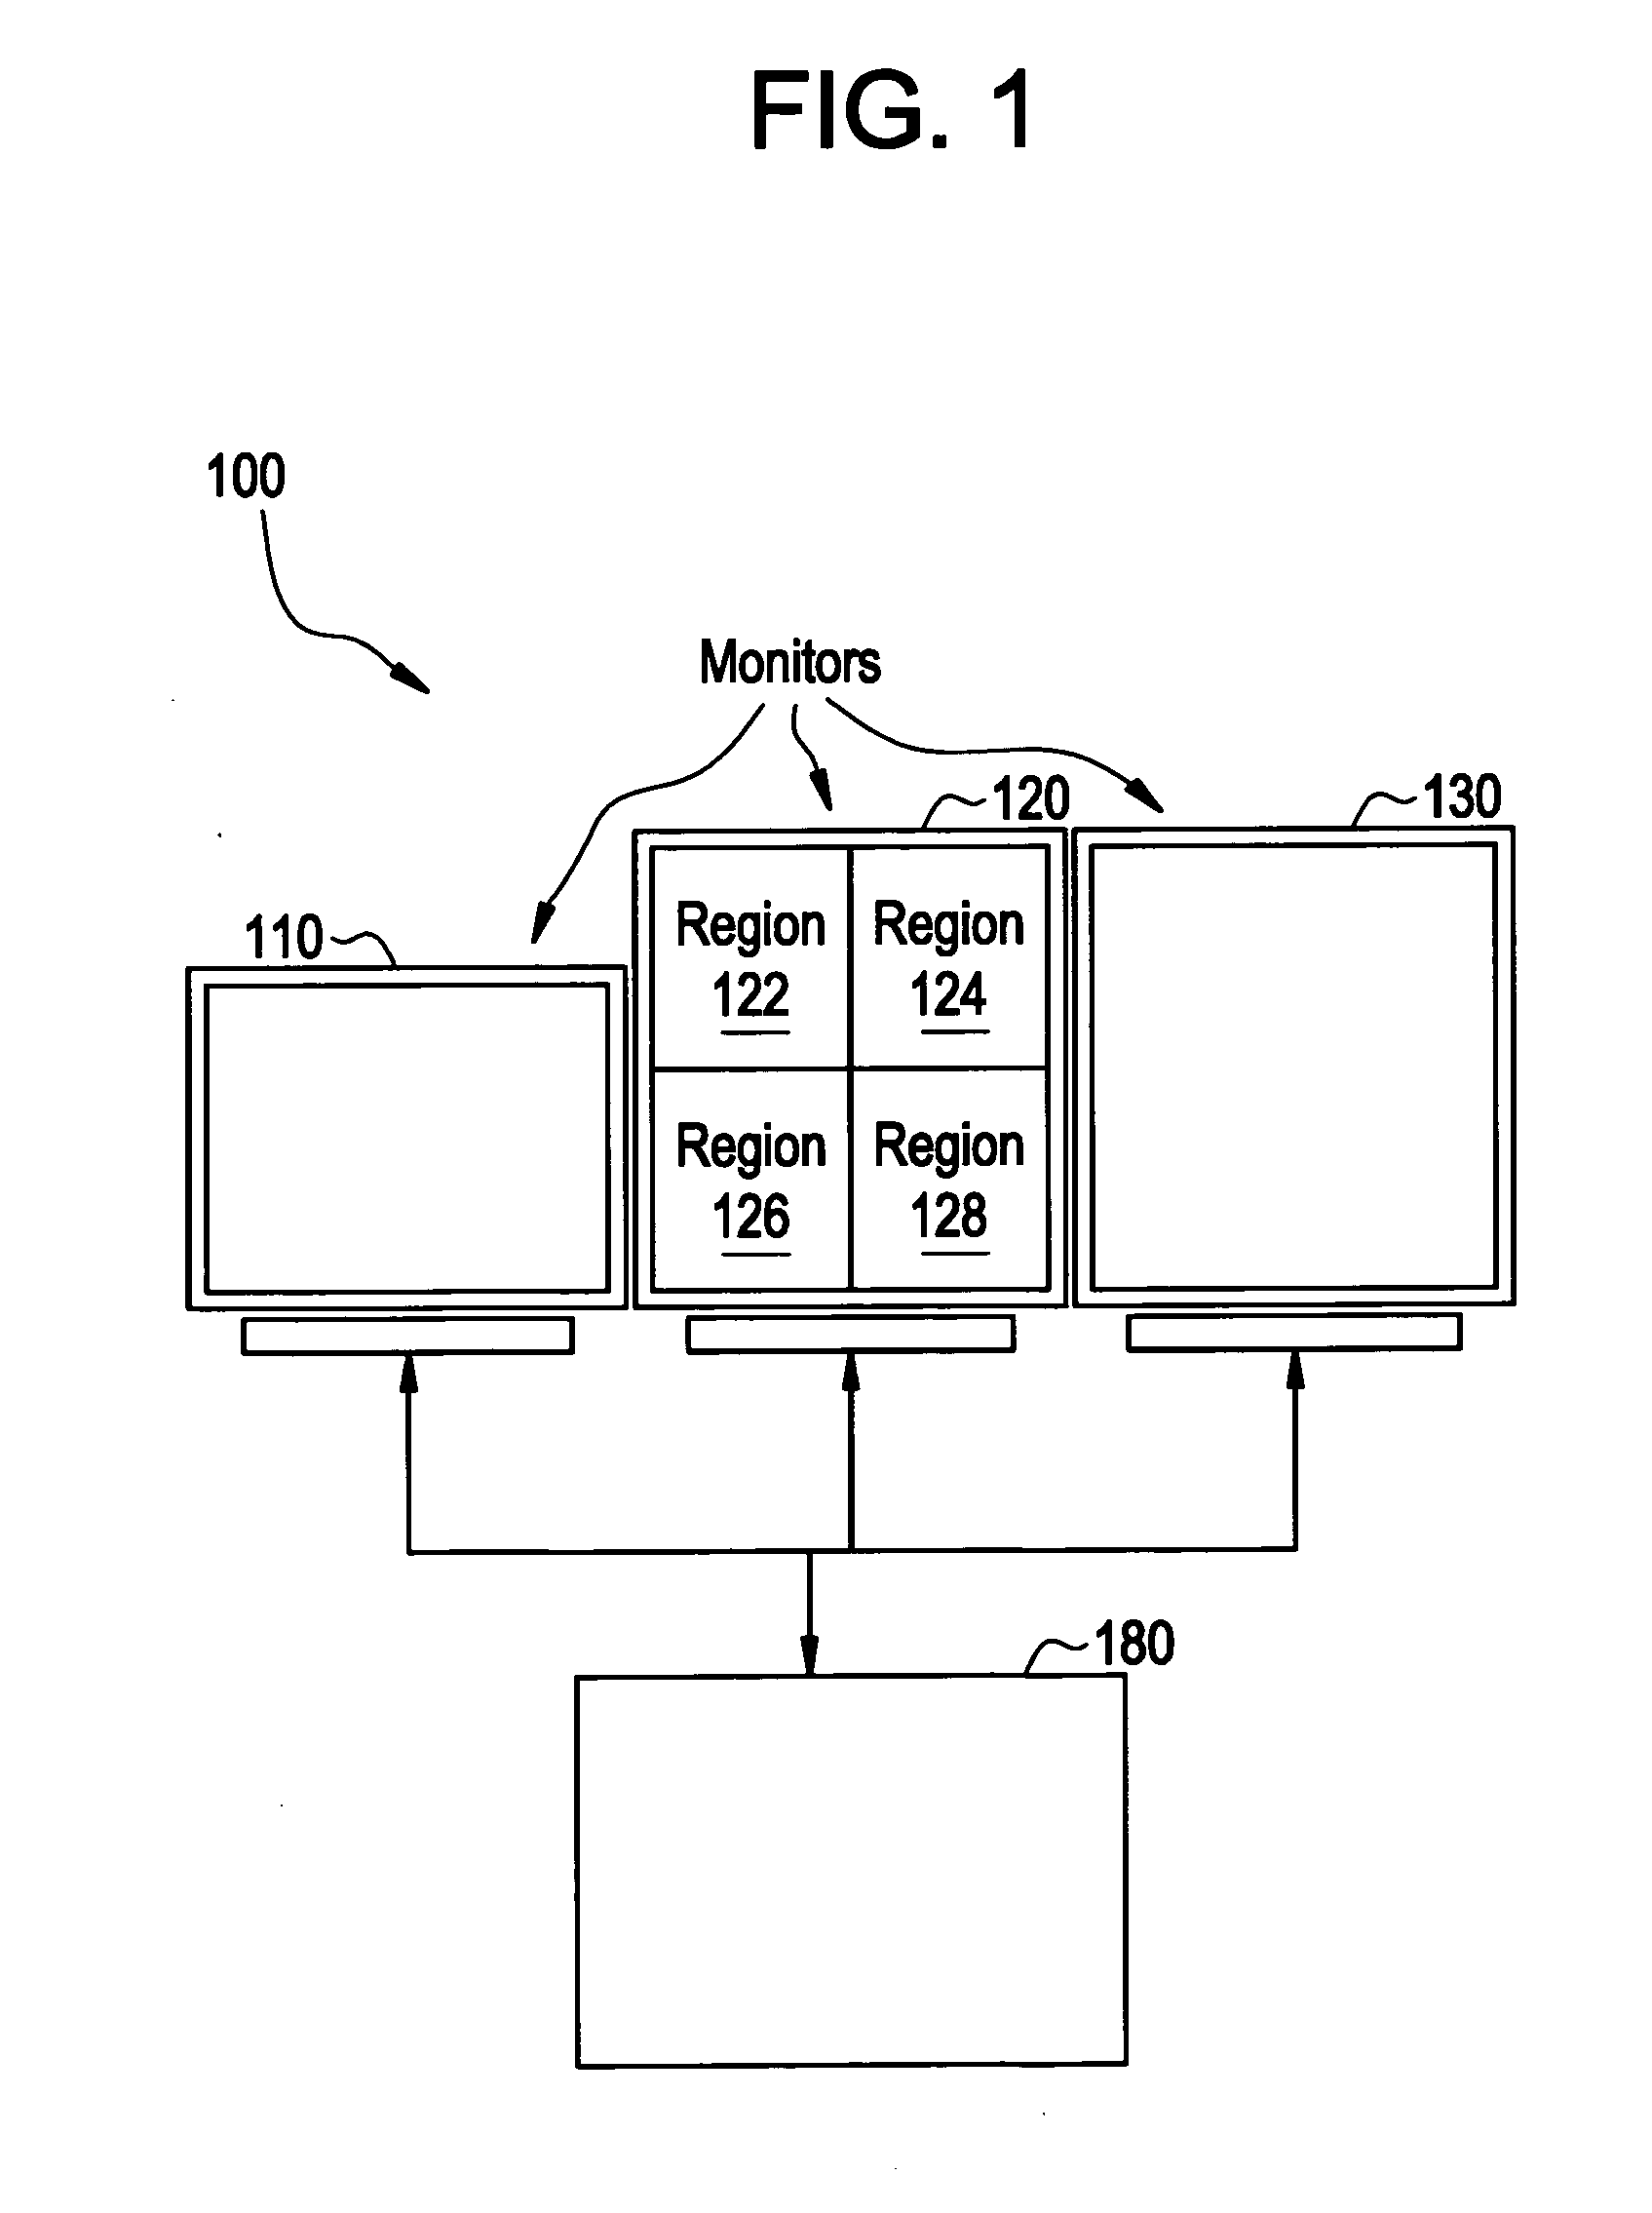 Method and apparatus for managing multi-patient contexts on a picture archiving and communication system